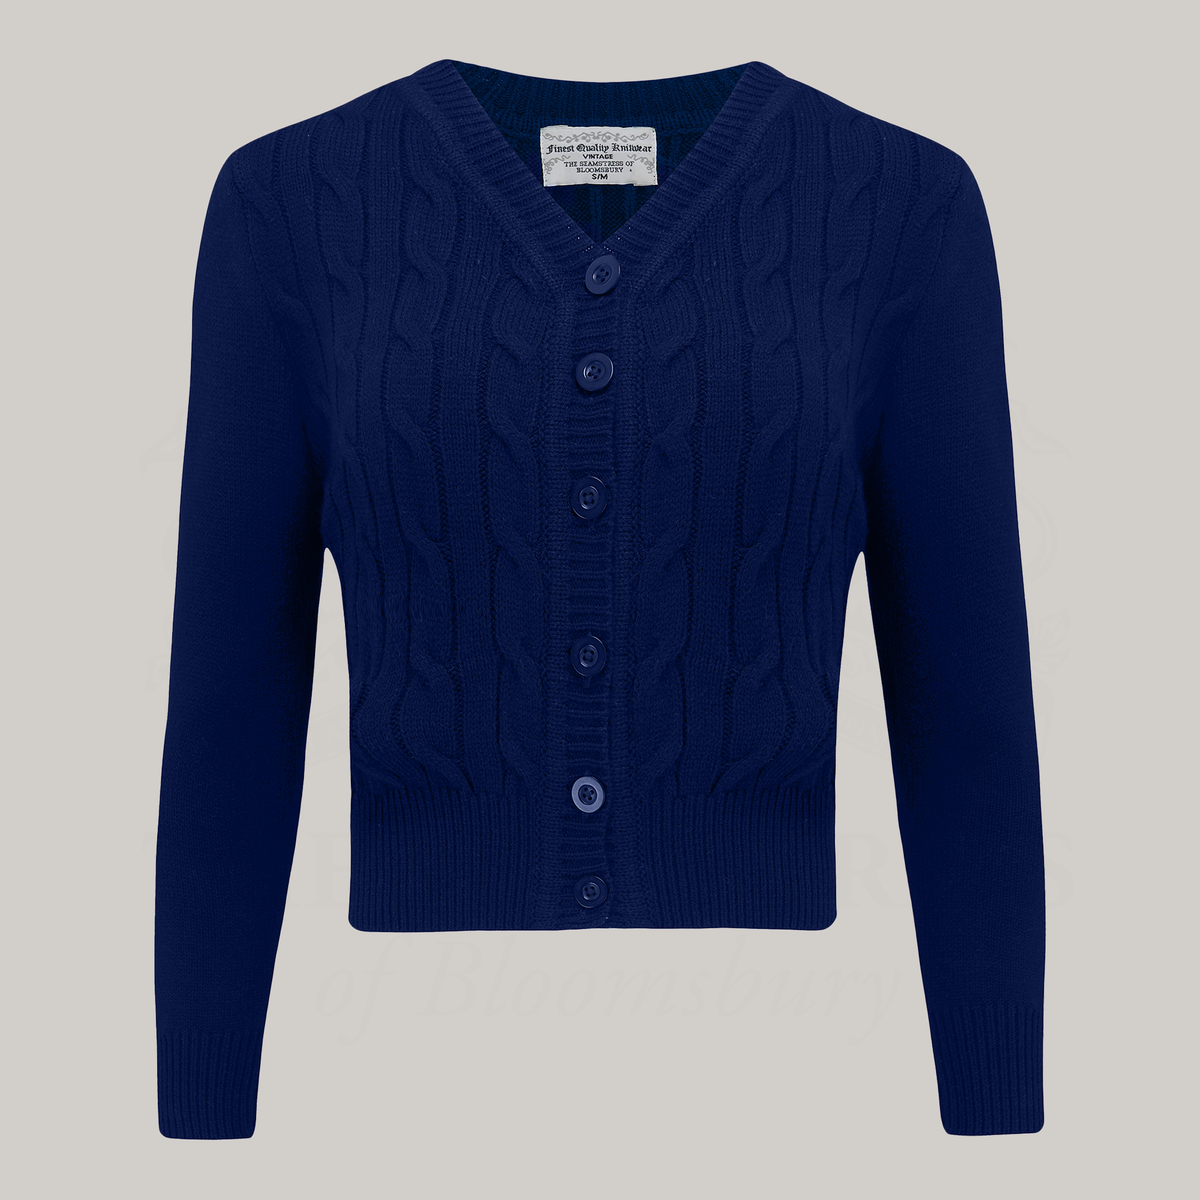 A 1940s style cable knitted cardigan in navy. Matching cream buttons feature down the front of the cardigan.